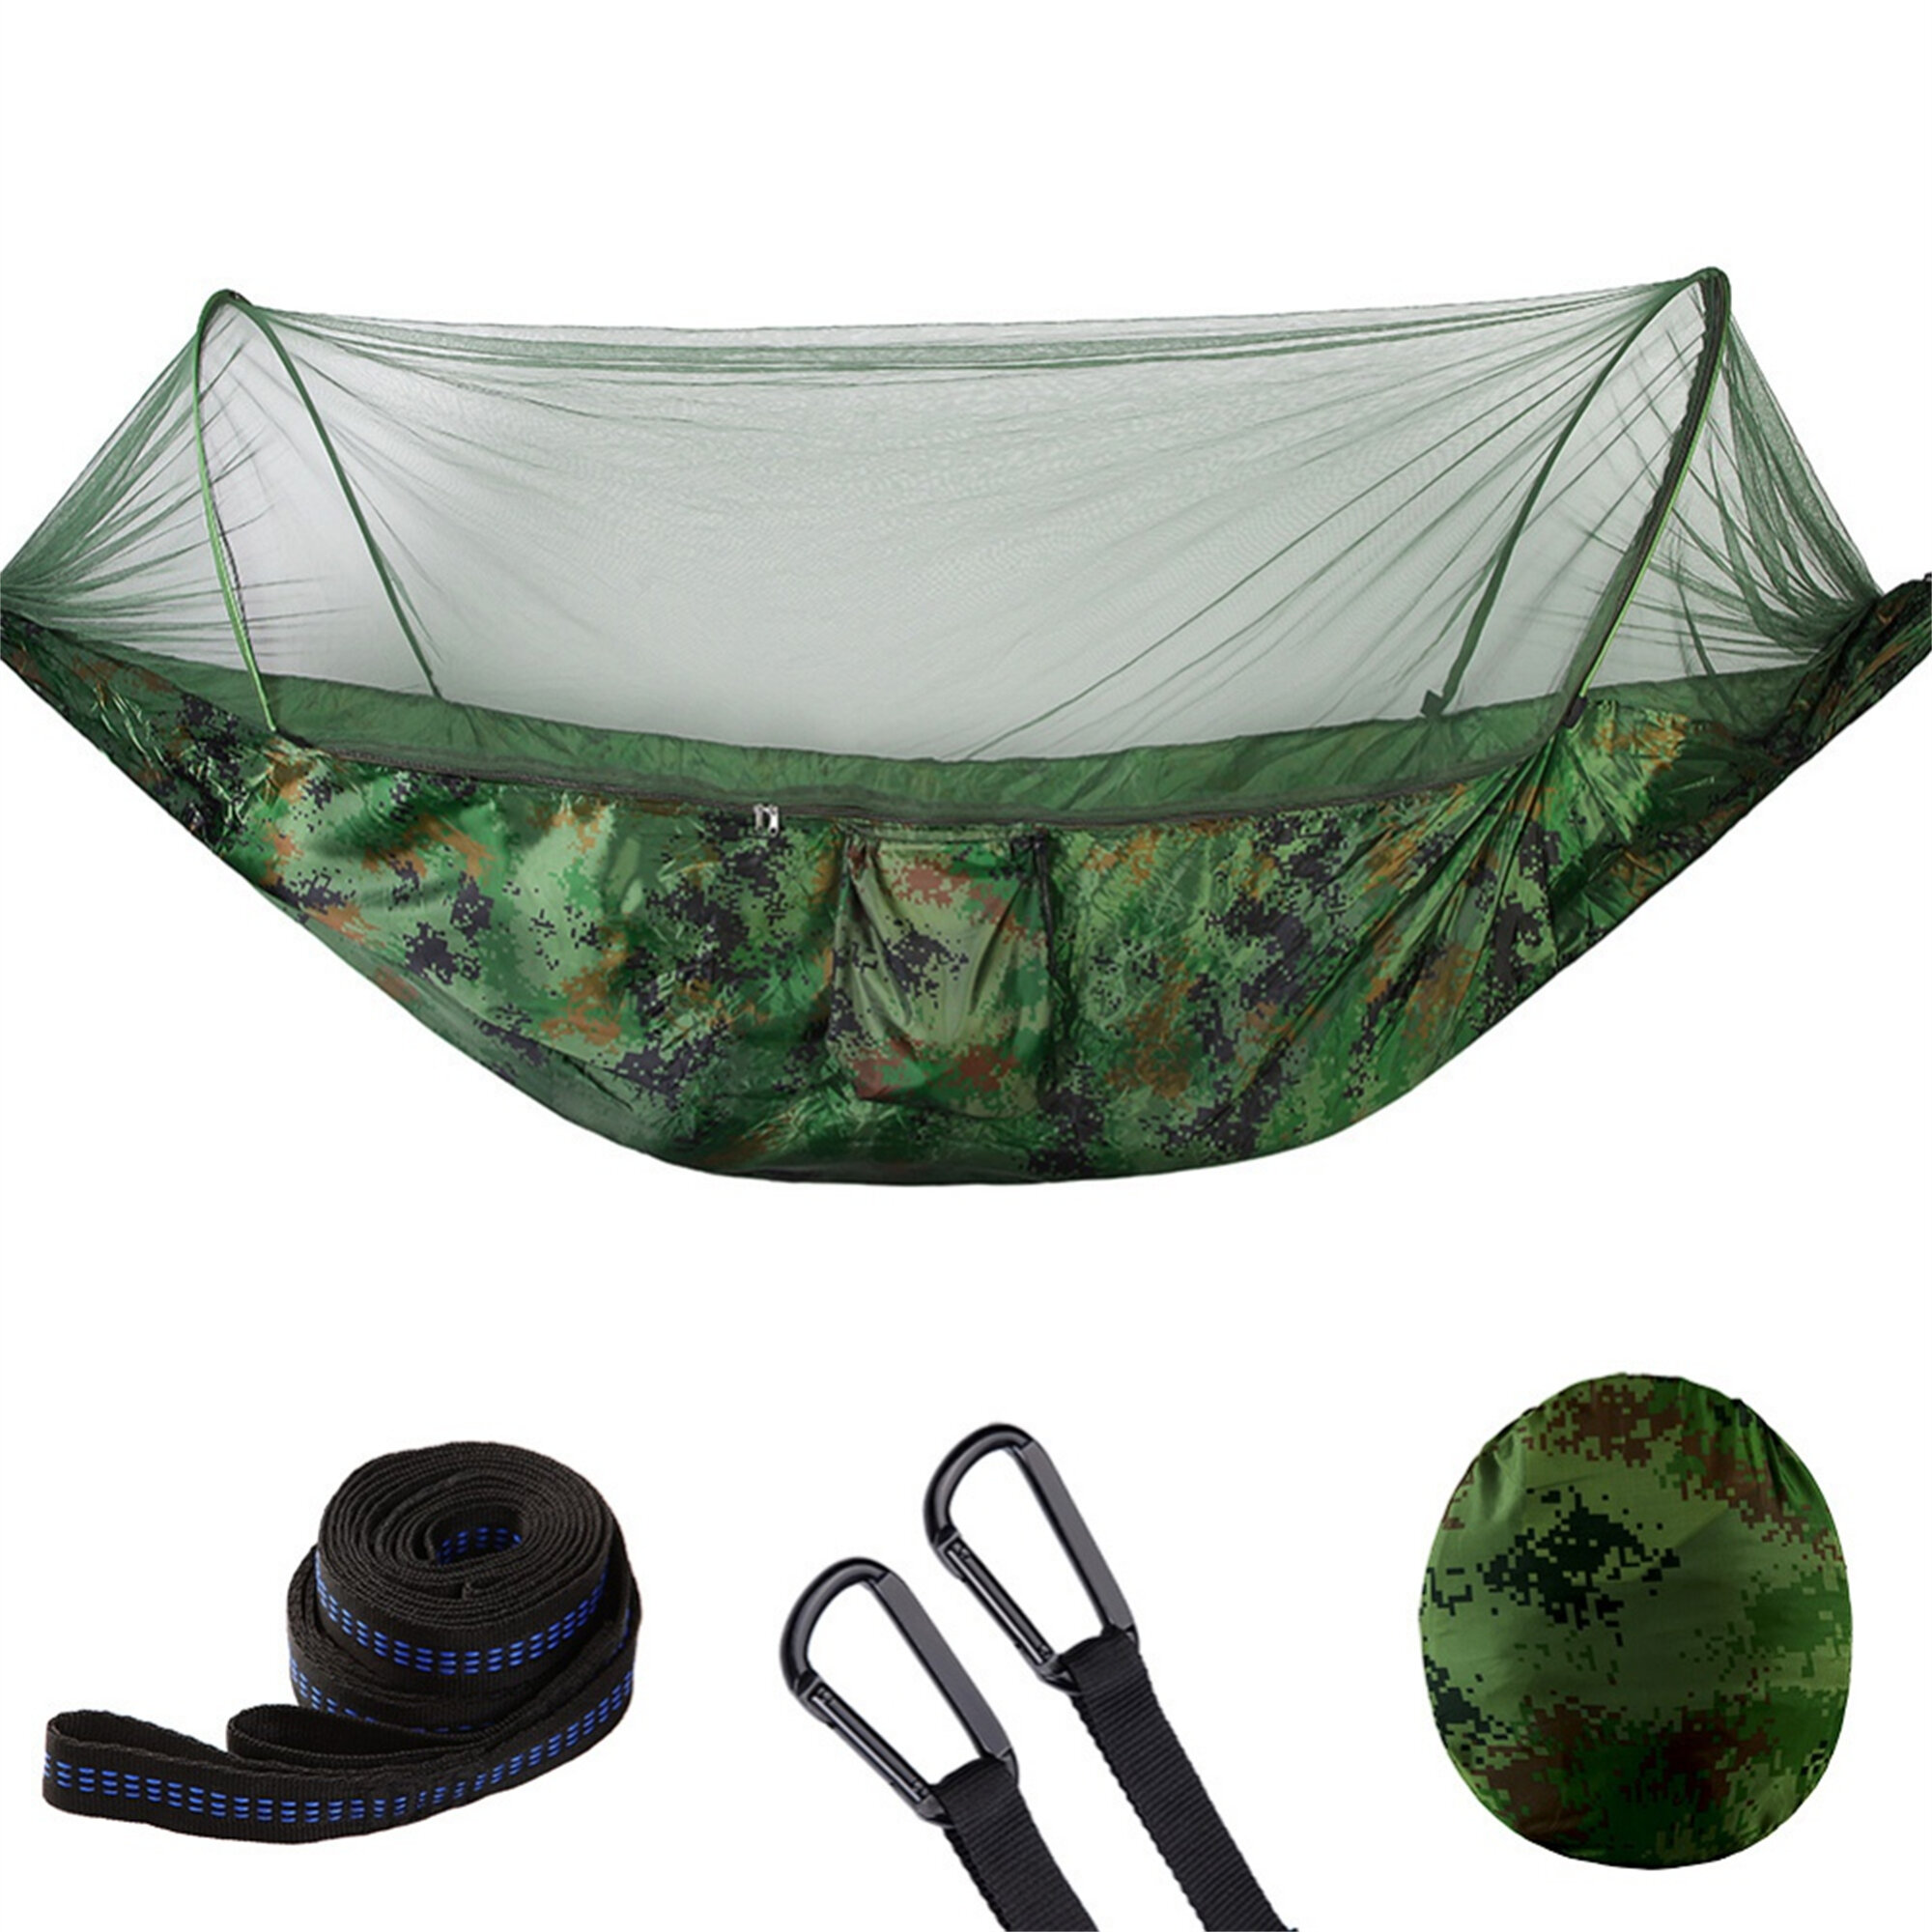 Portable Double Camping Hammock with Mosquito Net for Travel Beach Backpacking 